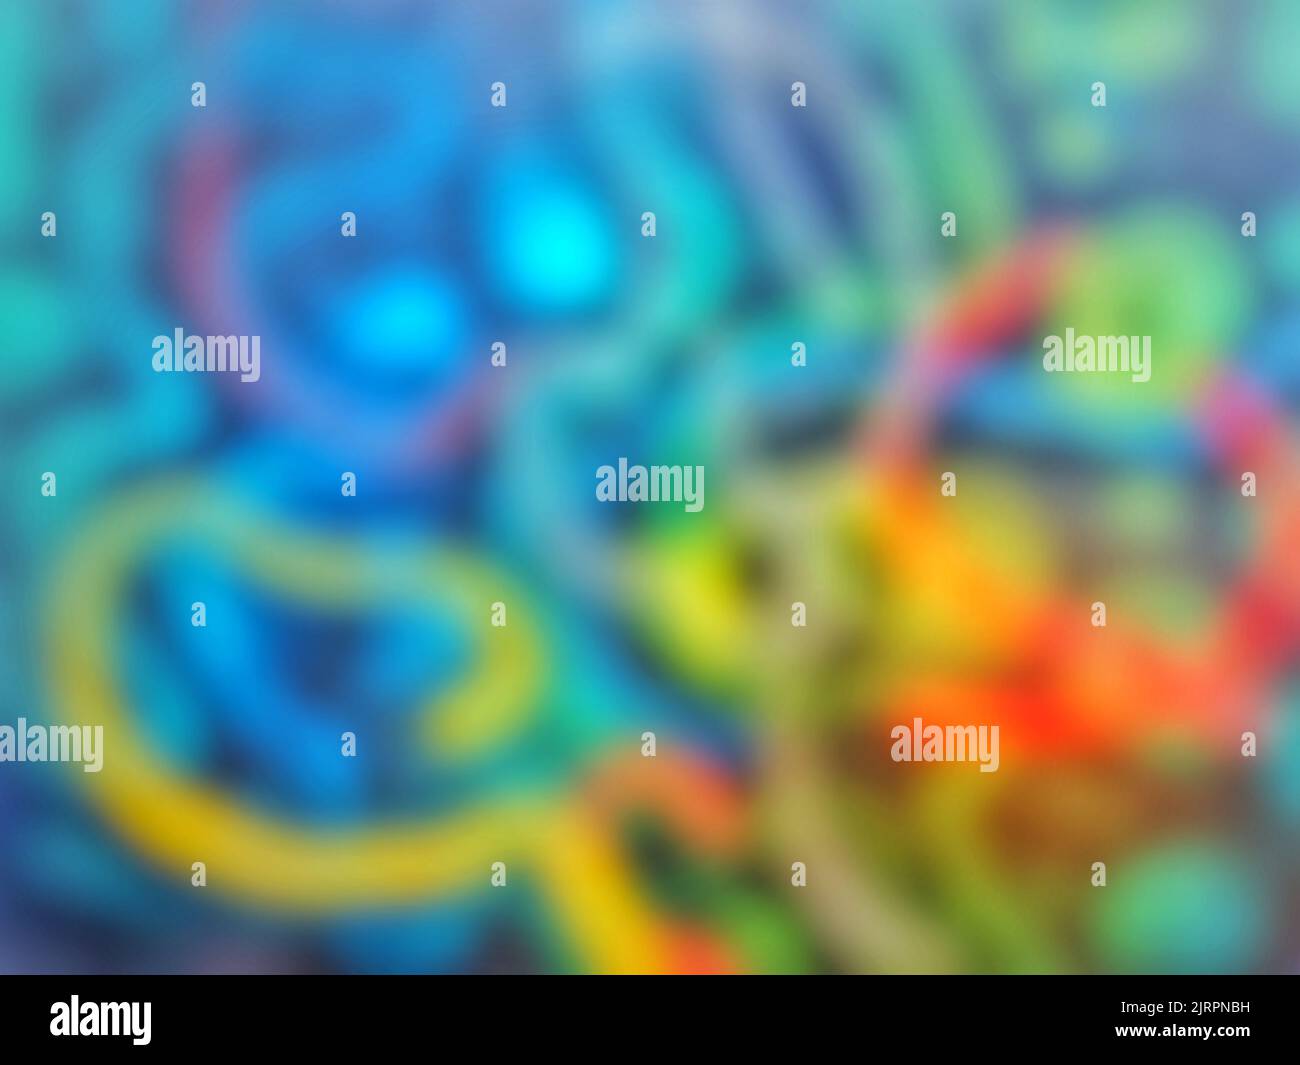 Abstract photo by freehand drawing in digital art. Stock Photo